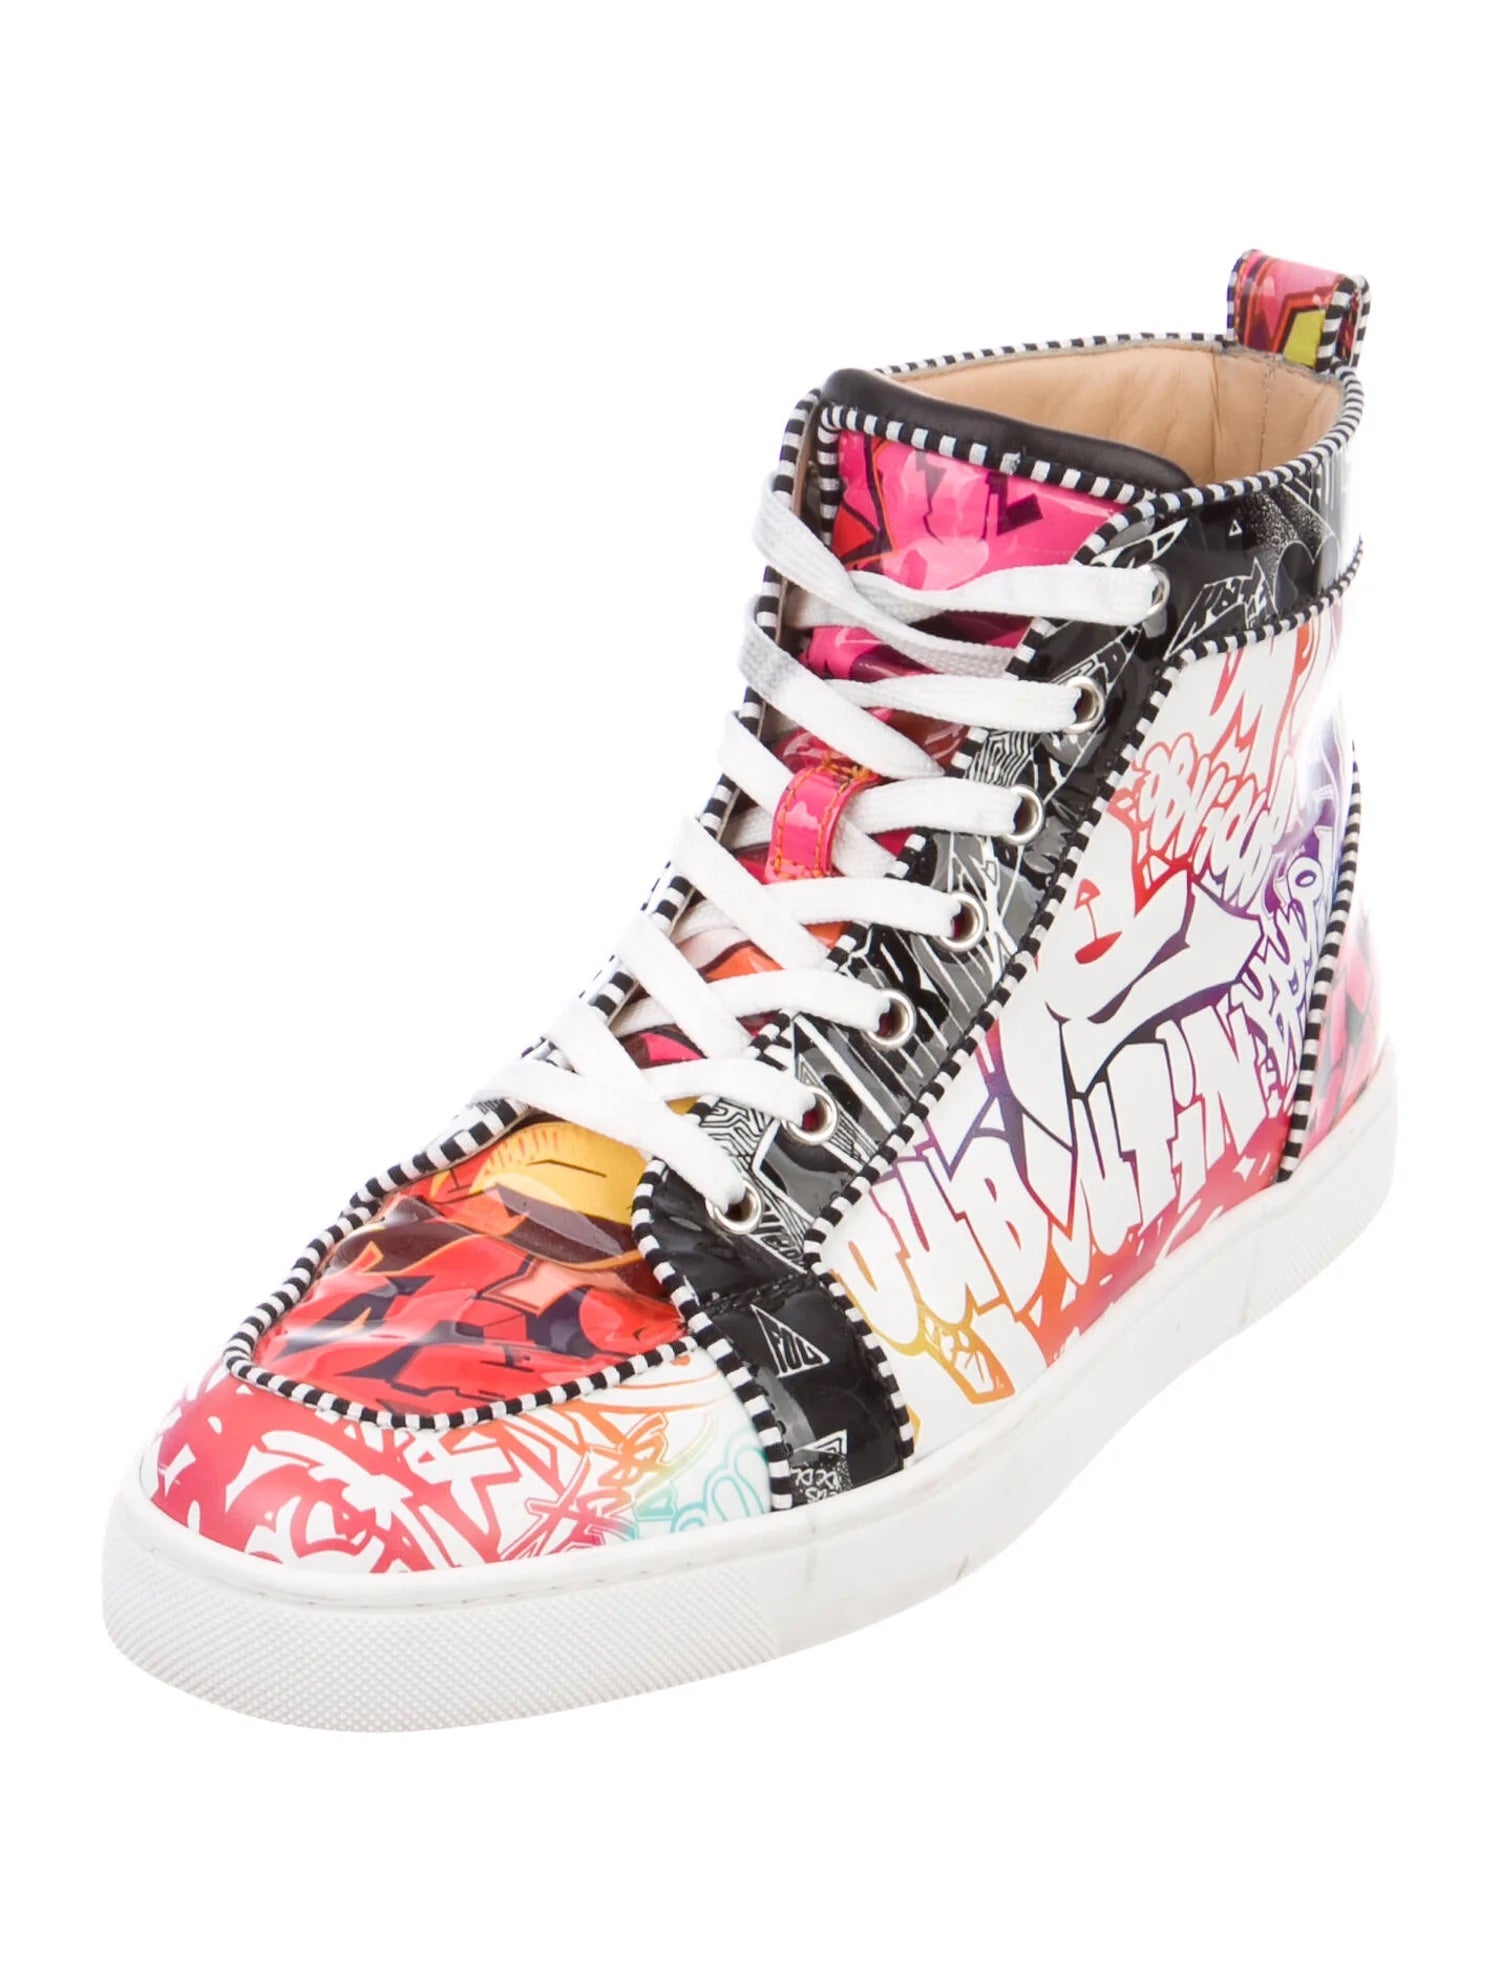 Christian Louboutin Lace Up Fashion Sneakers for Men